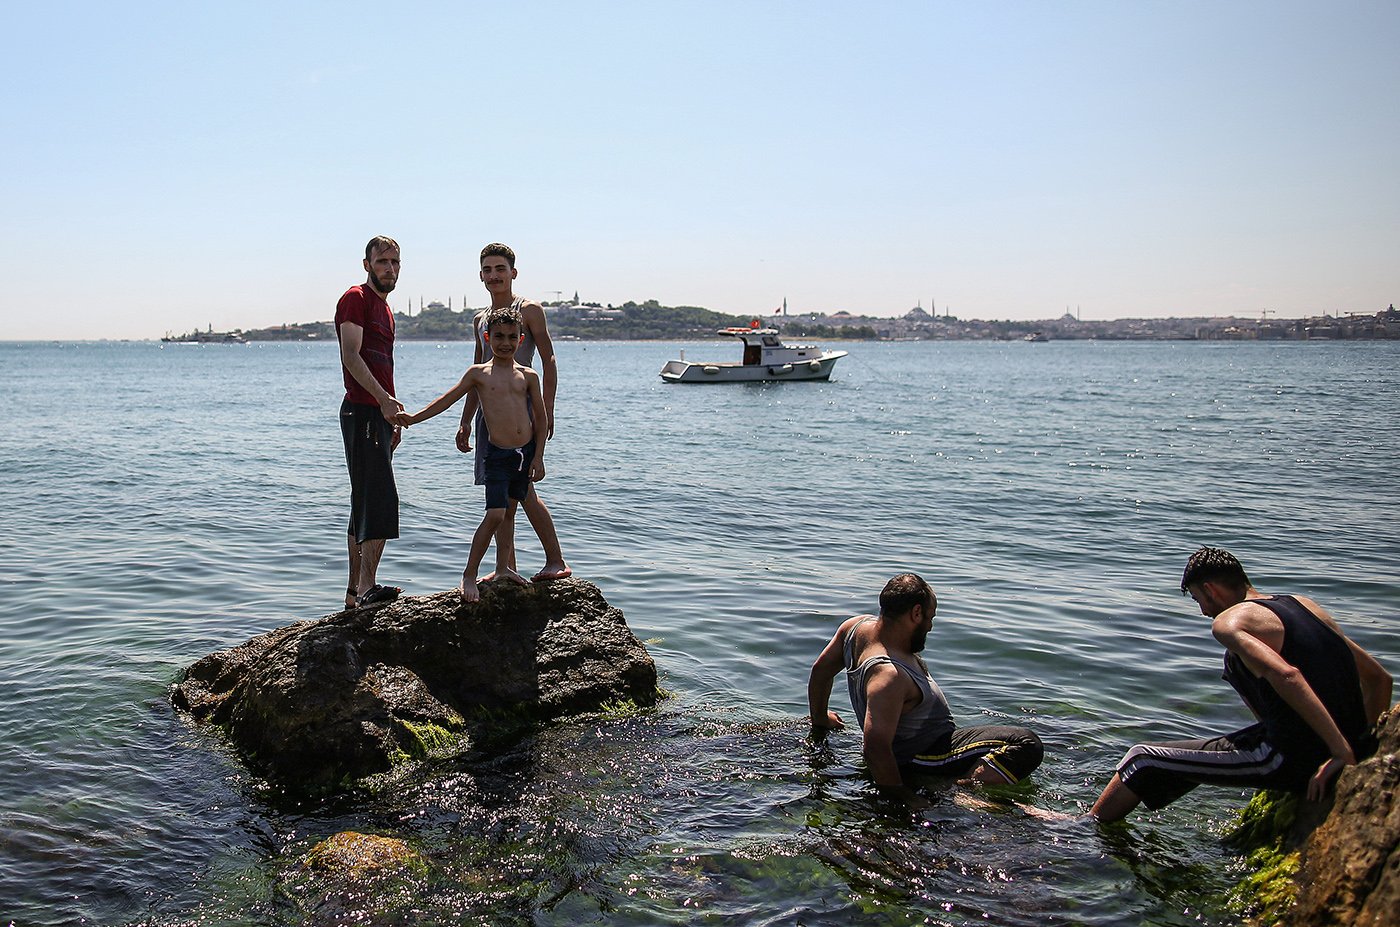 Syrian refugees cool off in the sea to beat the scorching heat during a sunny day in the Bosphorus Strait, Istanbul, Turkey, 08 June 2019.